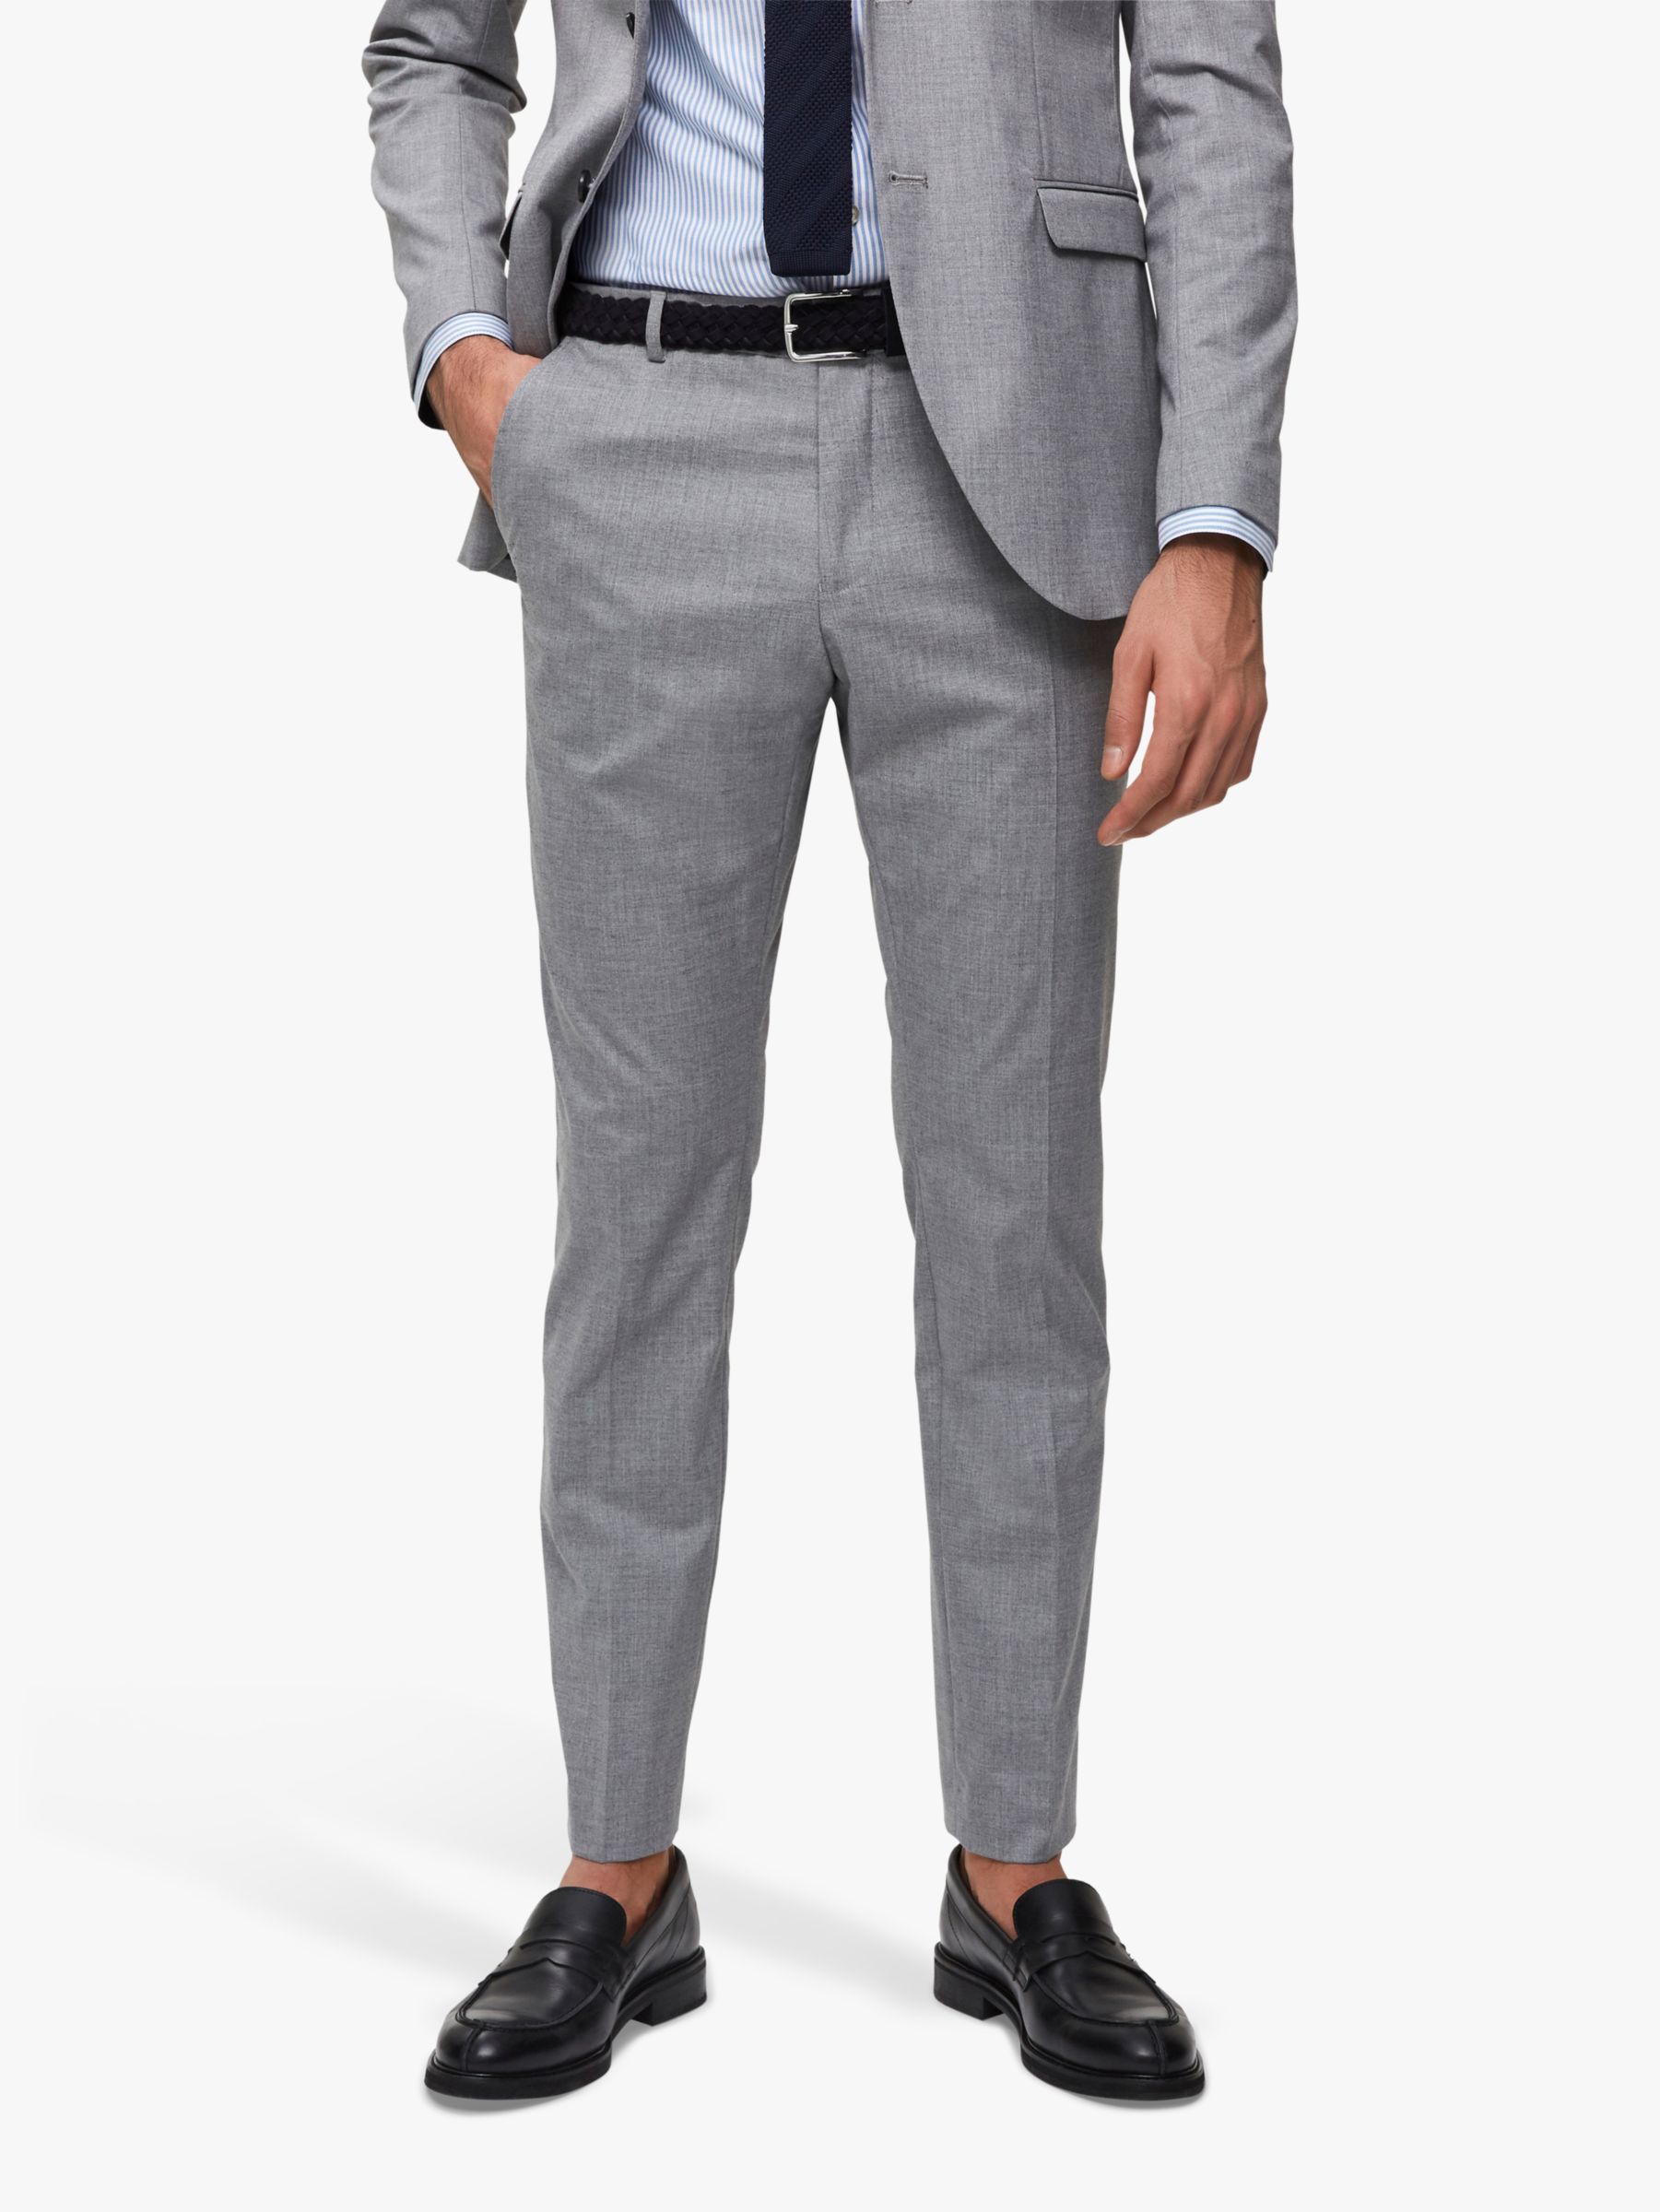 Mens Viscose Slim Fit Formal Pant, Size: 28-36 inch at Rs 230 in